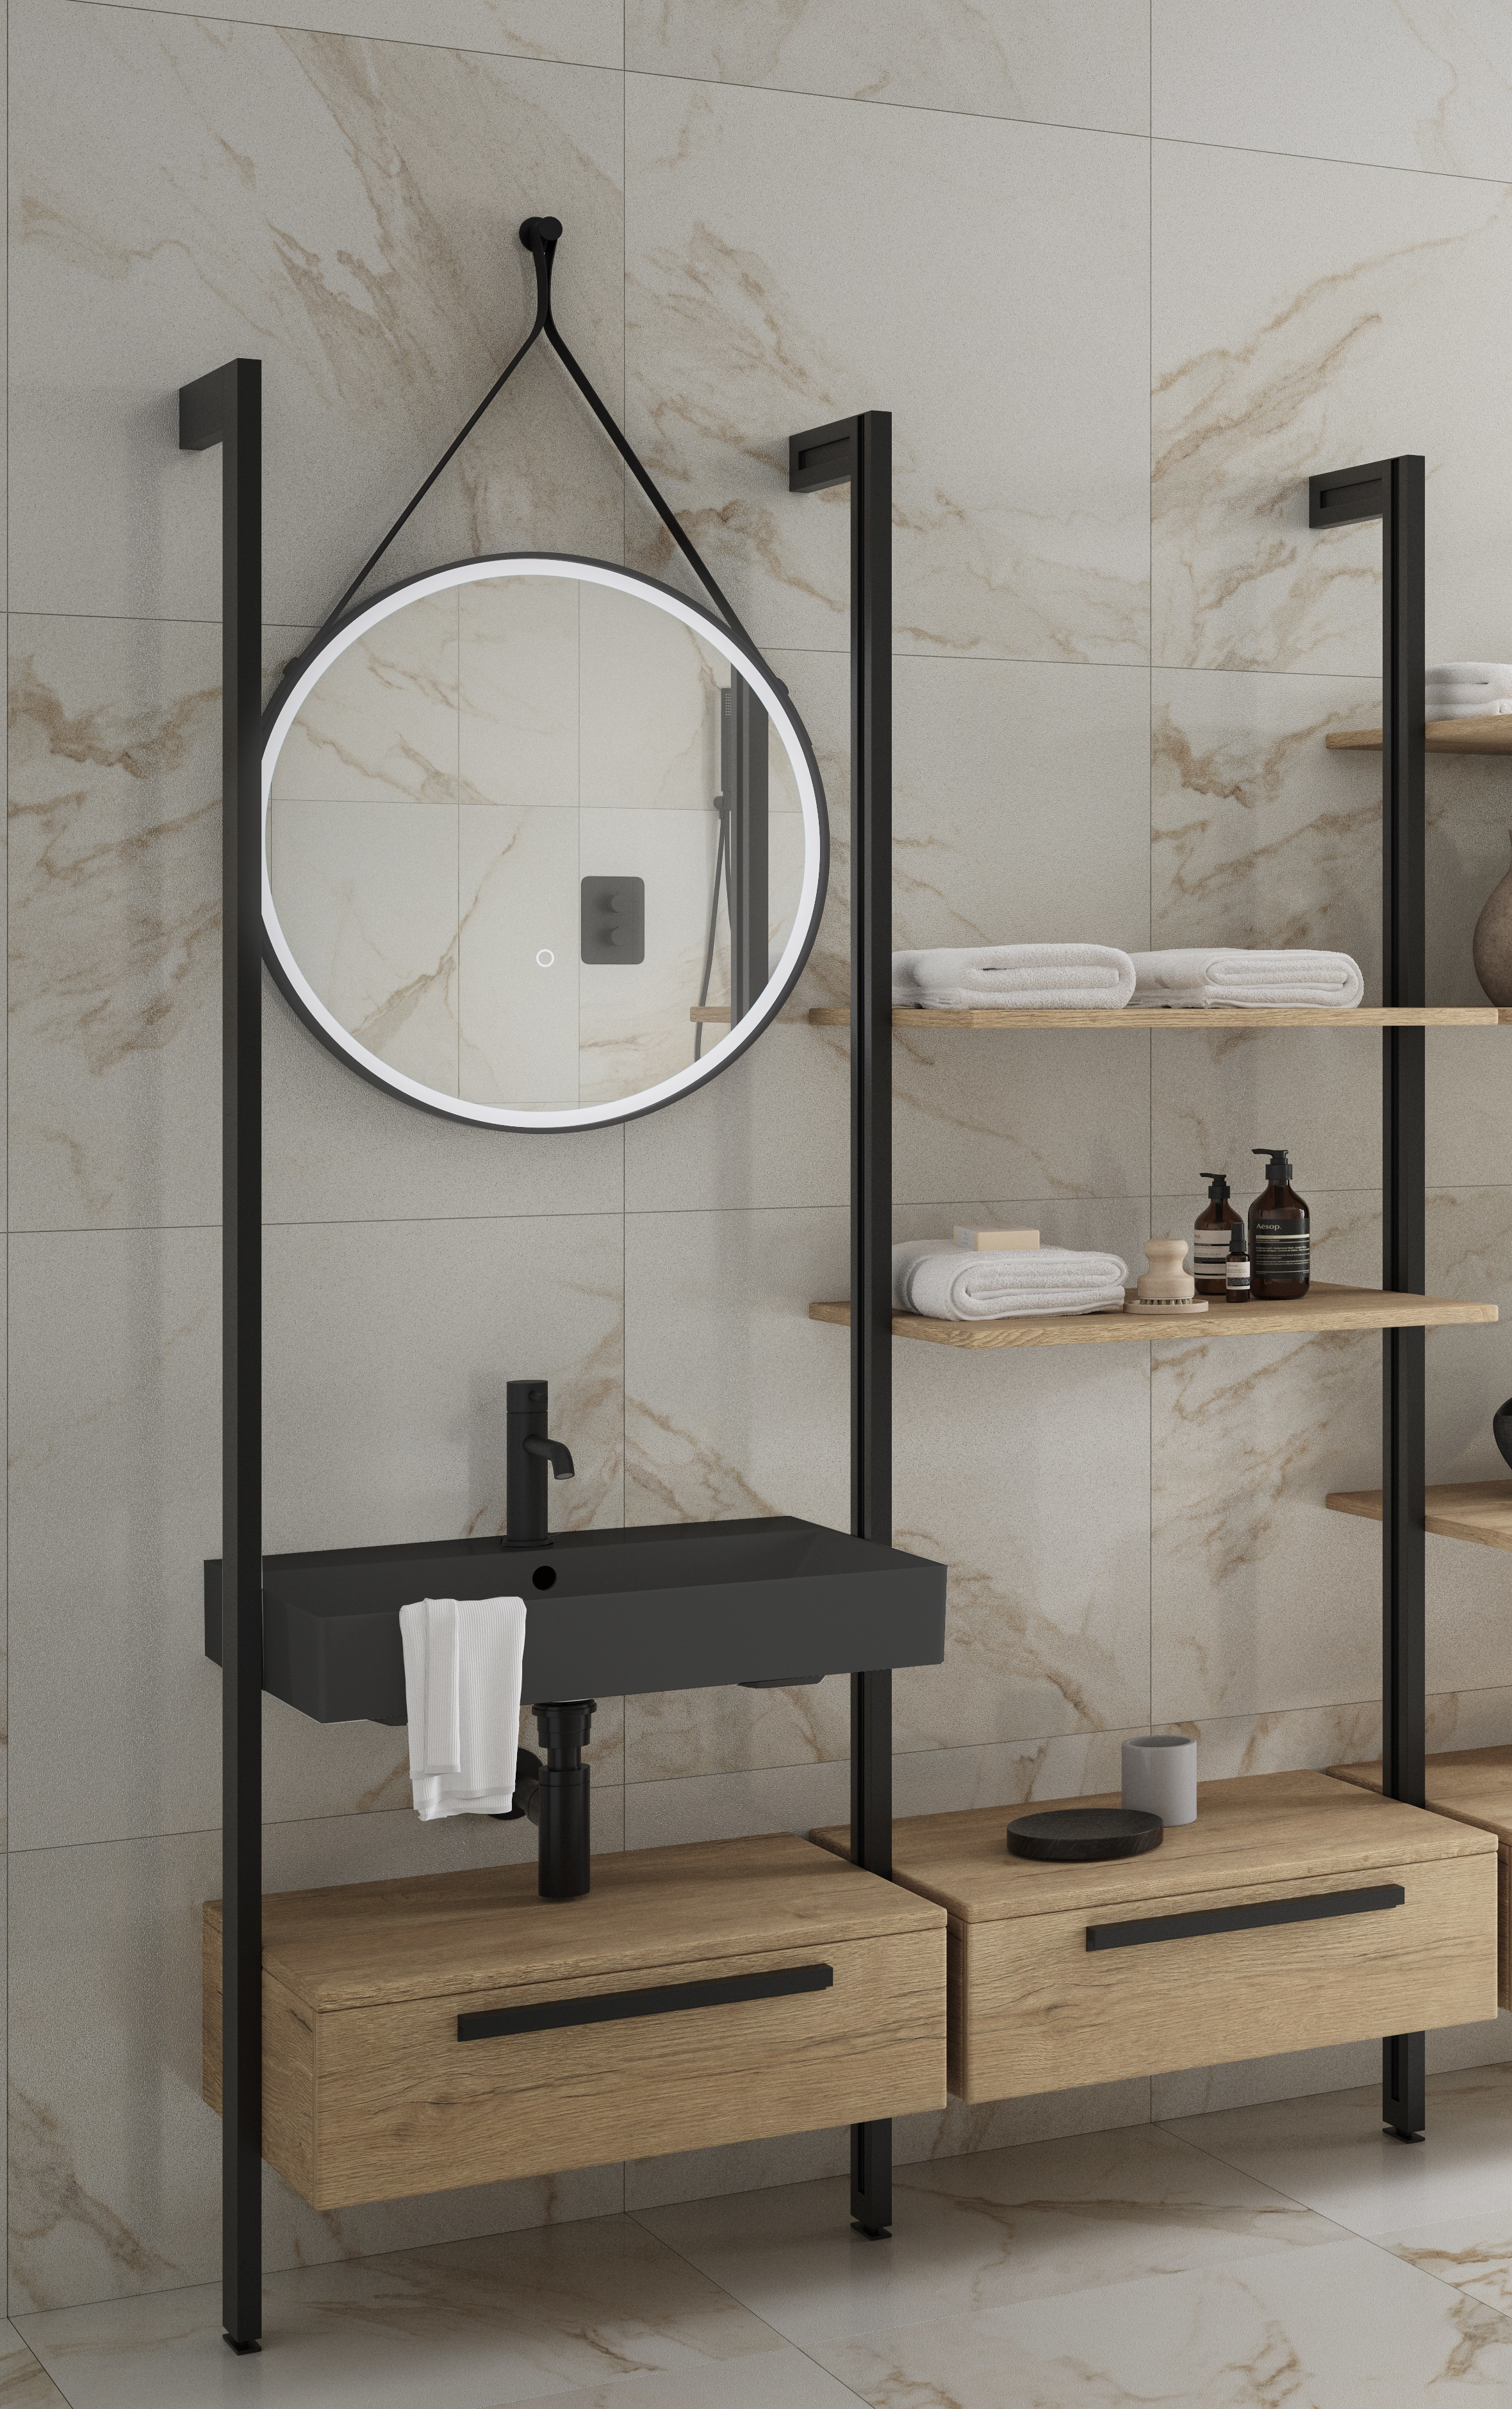 Wickes Rimini Wall System Vanity & Tower Unit Only with Shelves & Black Basin - 1800mm